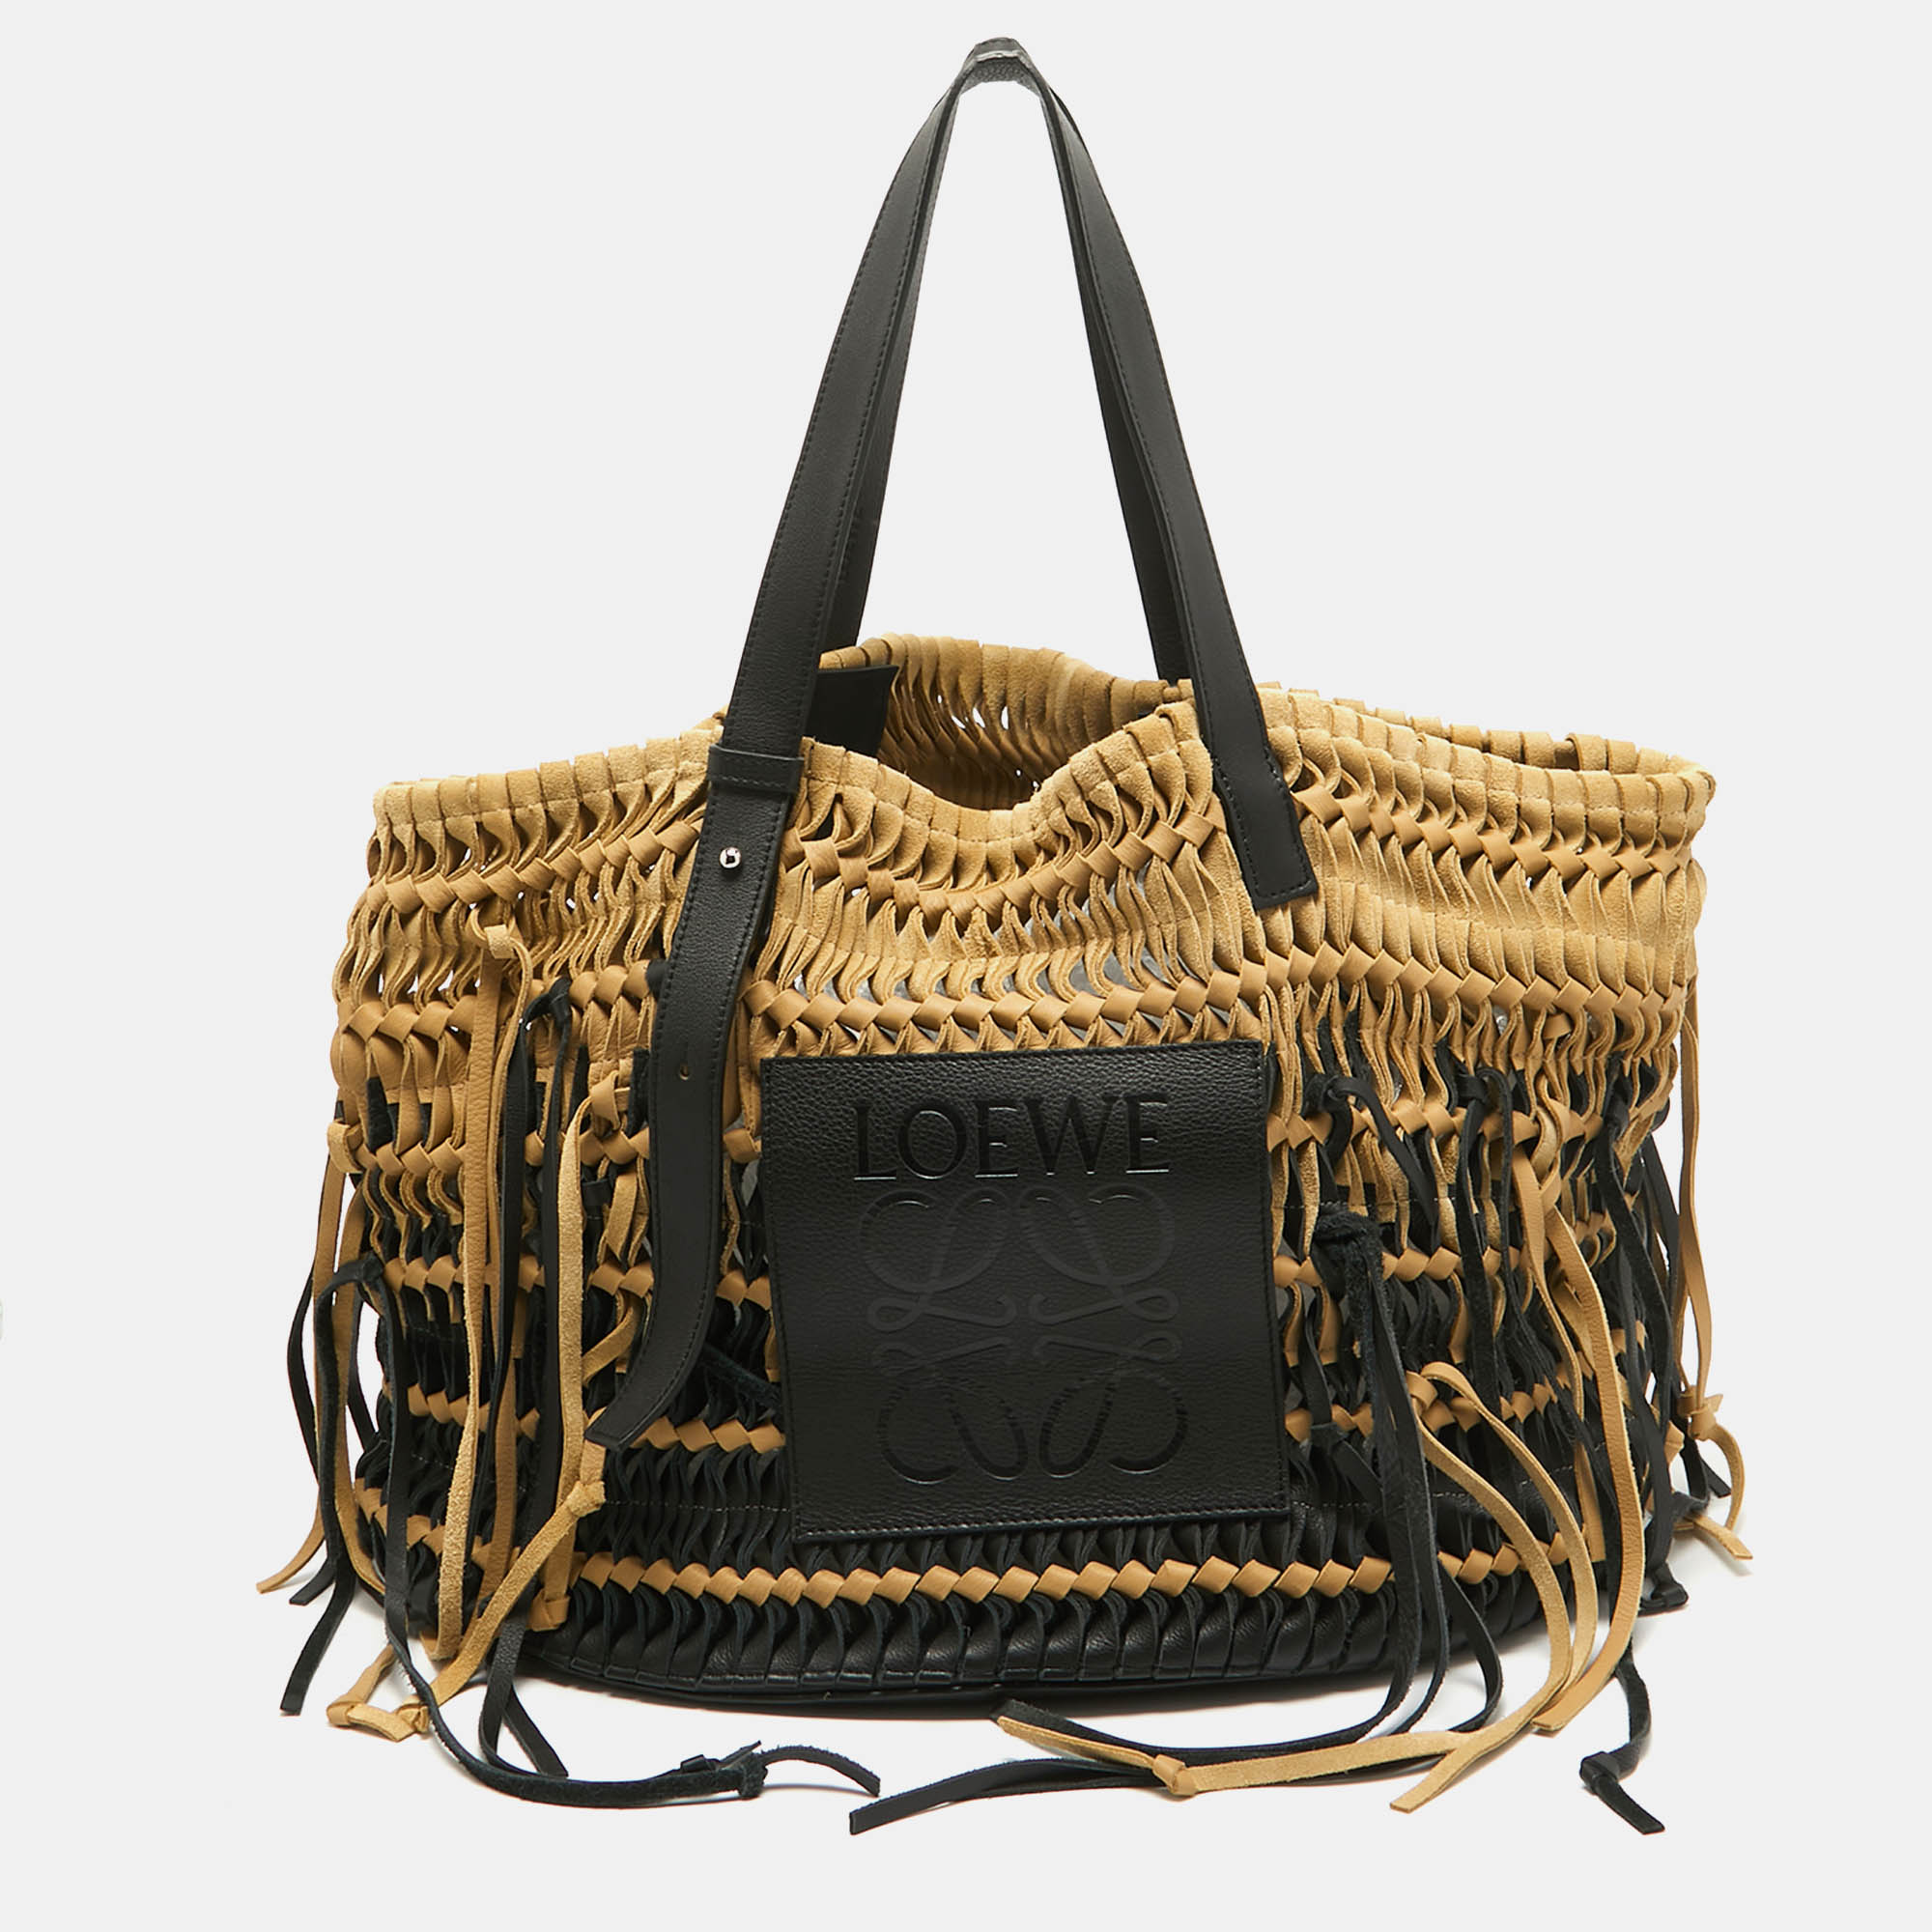 Pre-owned Loewe Black/beige Suede And Leather Anagram Woven Fringe Tote